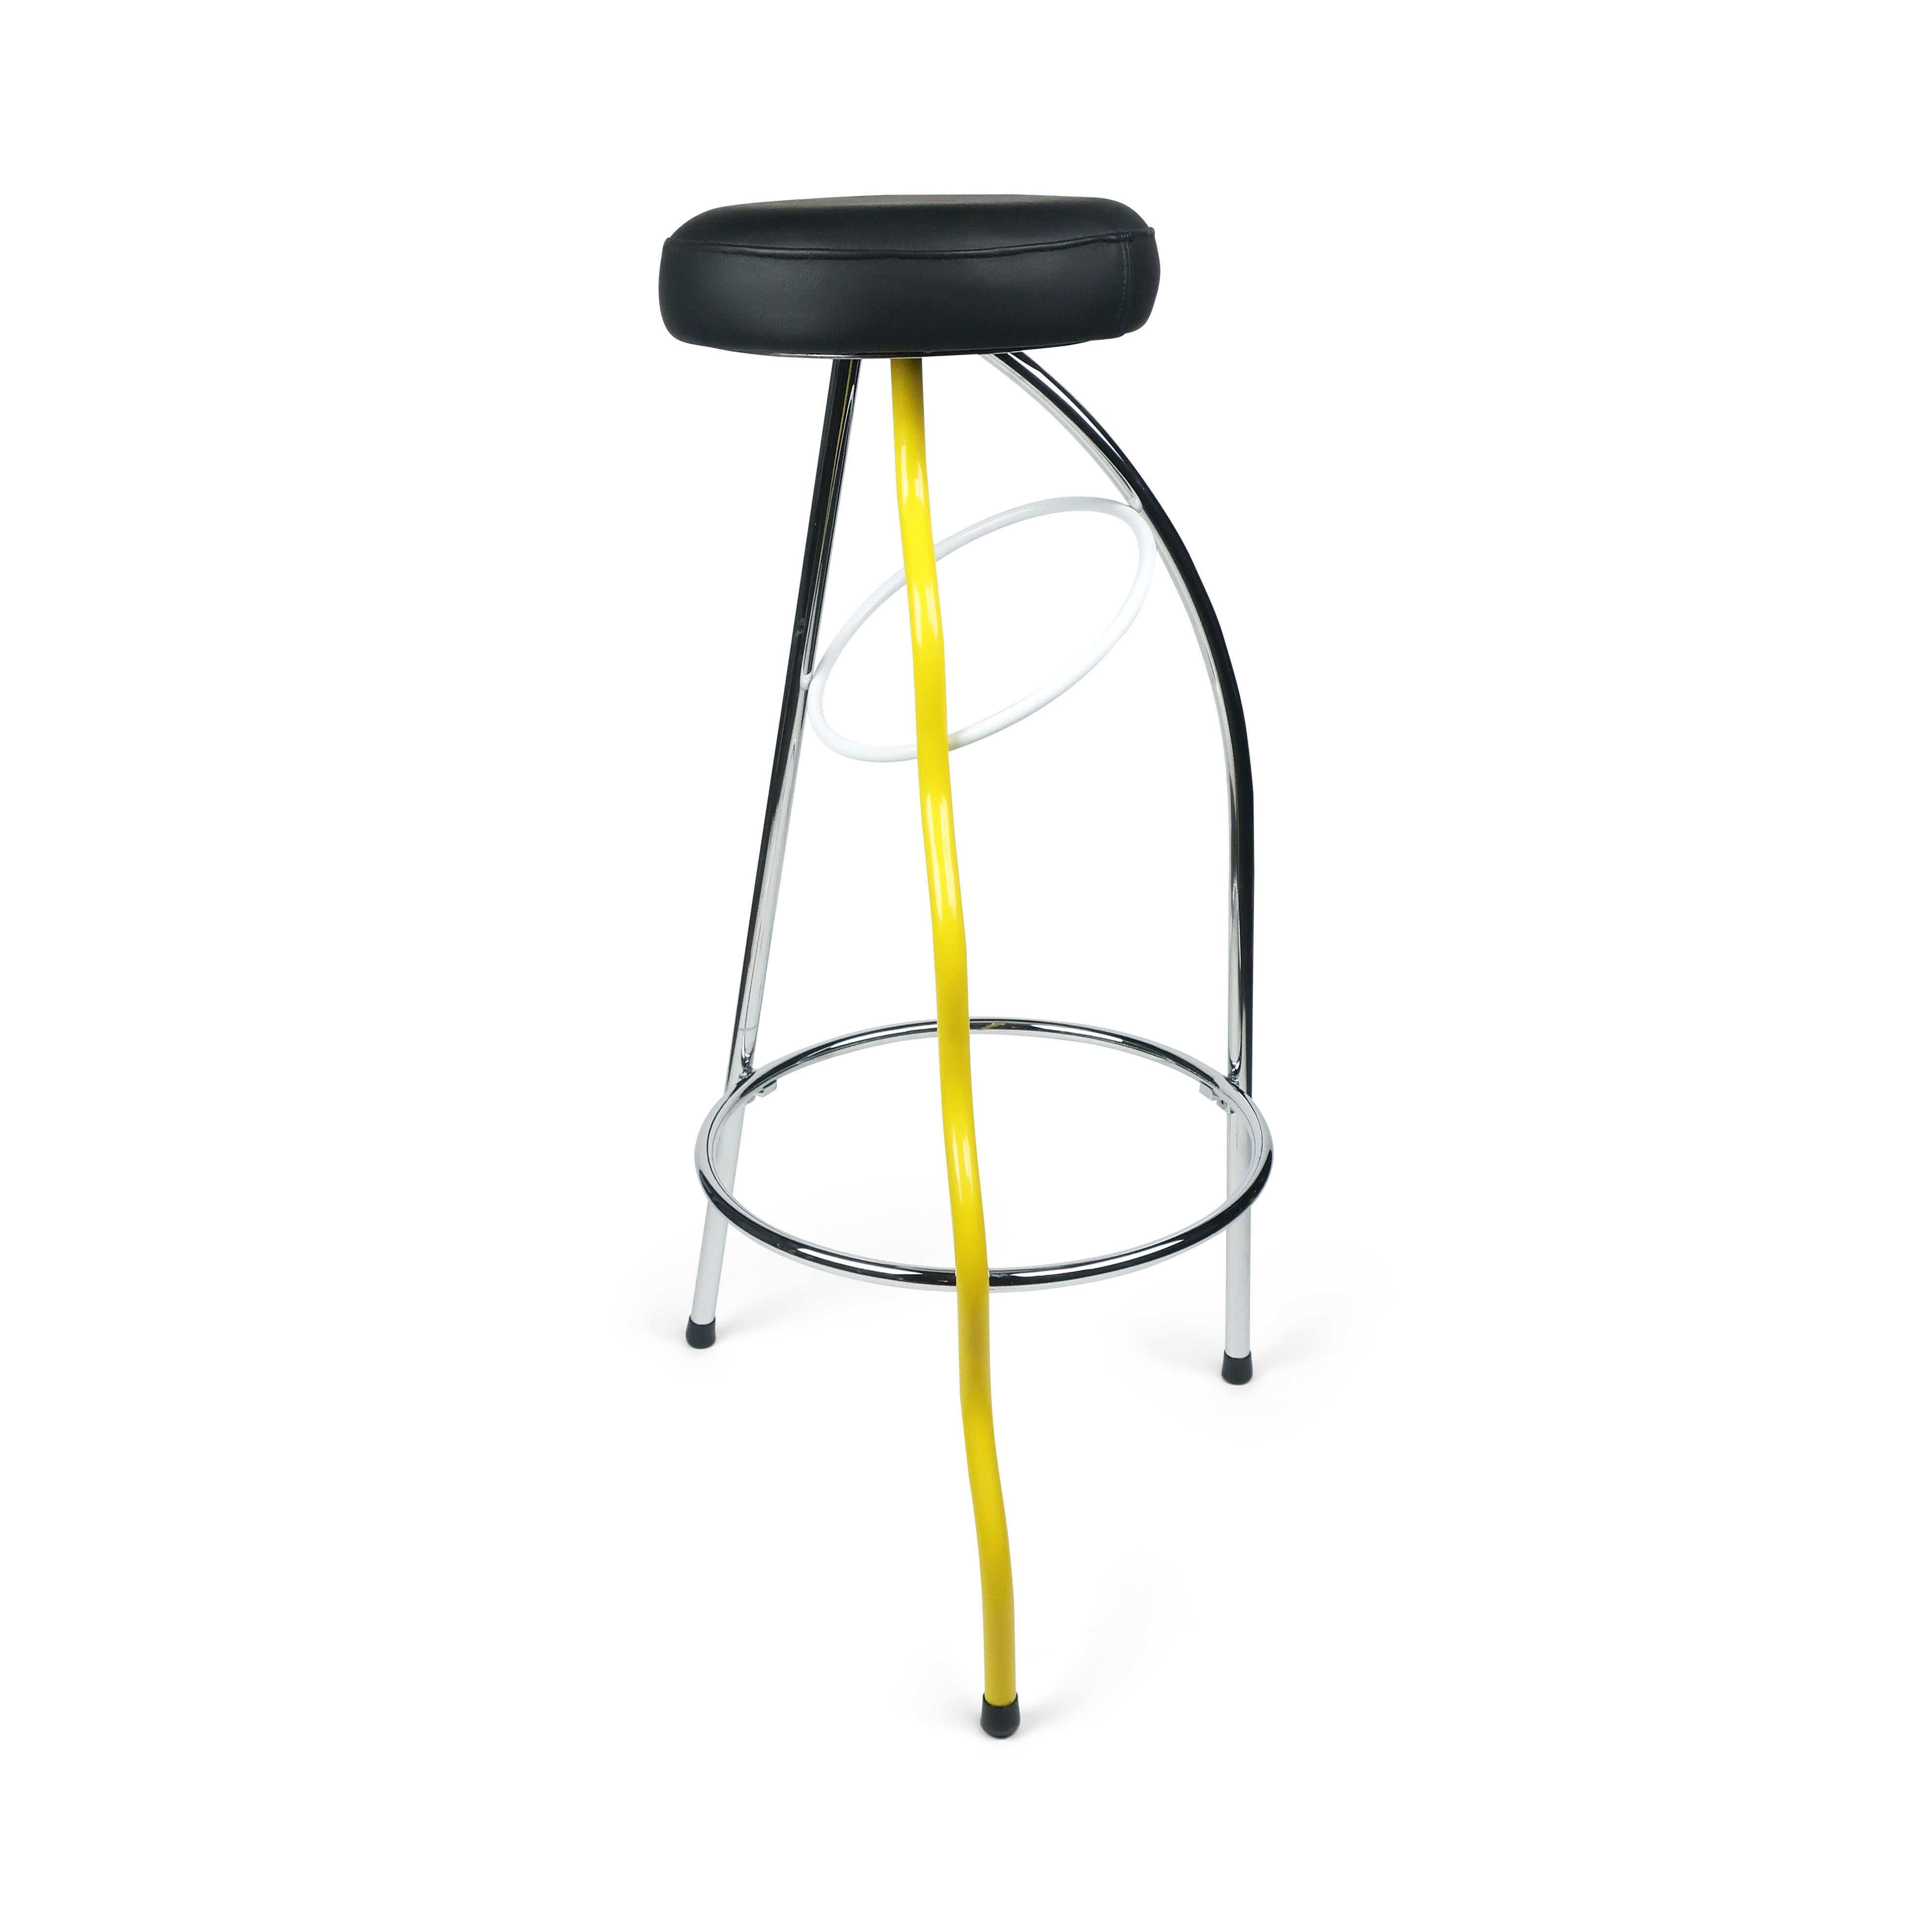 A fantastic bar stool designed by Javier Mariscal for Bar Dúplex in Valencia in 1980. The Duplex bar stool is an iconic example of 1980s and postmodern design and was produced by B. D. Ediciones de Diseno, Barcelona. Three steel legs (one painted